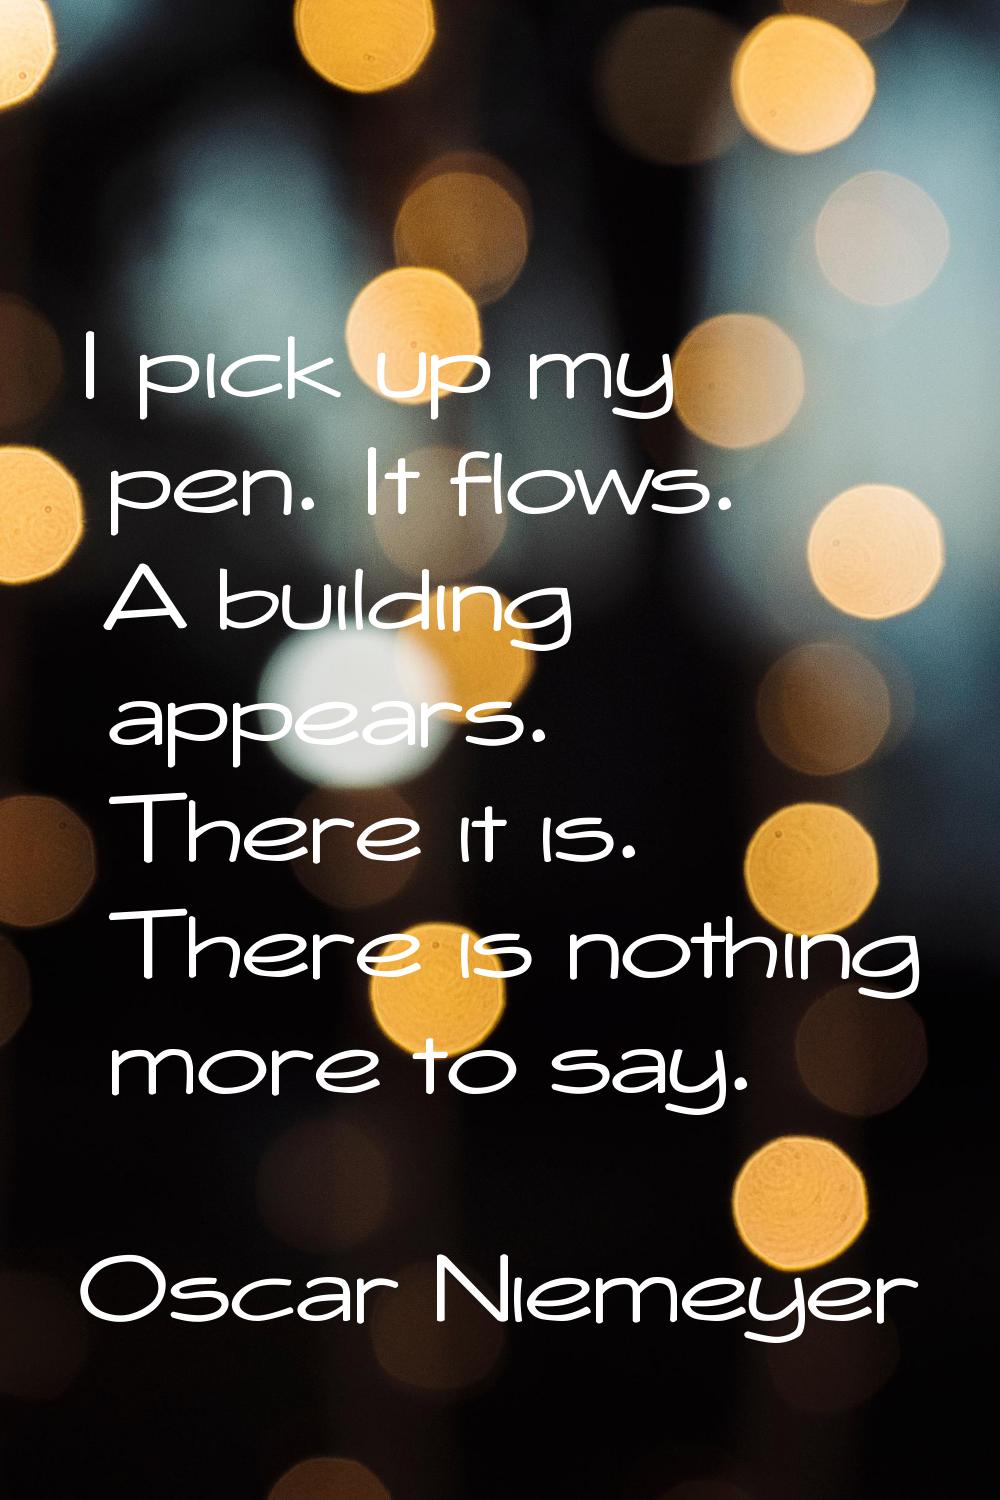 I pick up my pen. It flows. A building appears. There it is. There is nothing more to say.